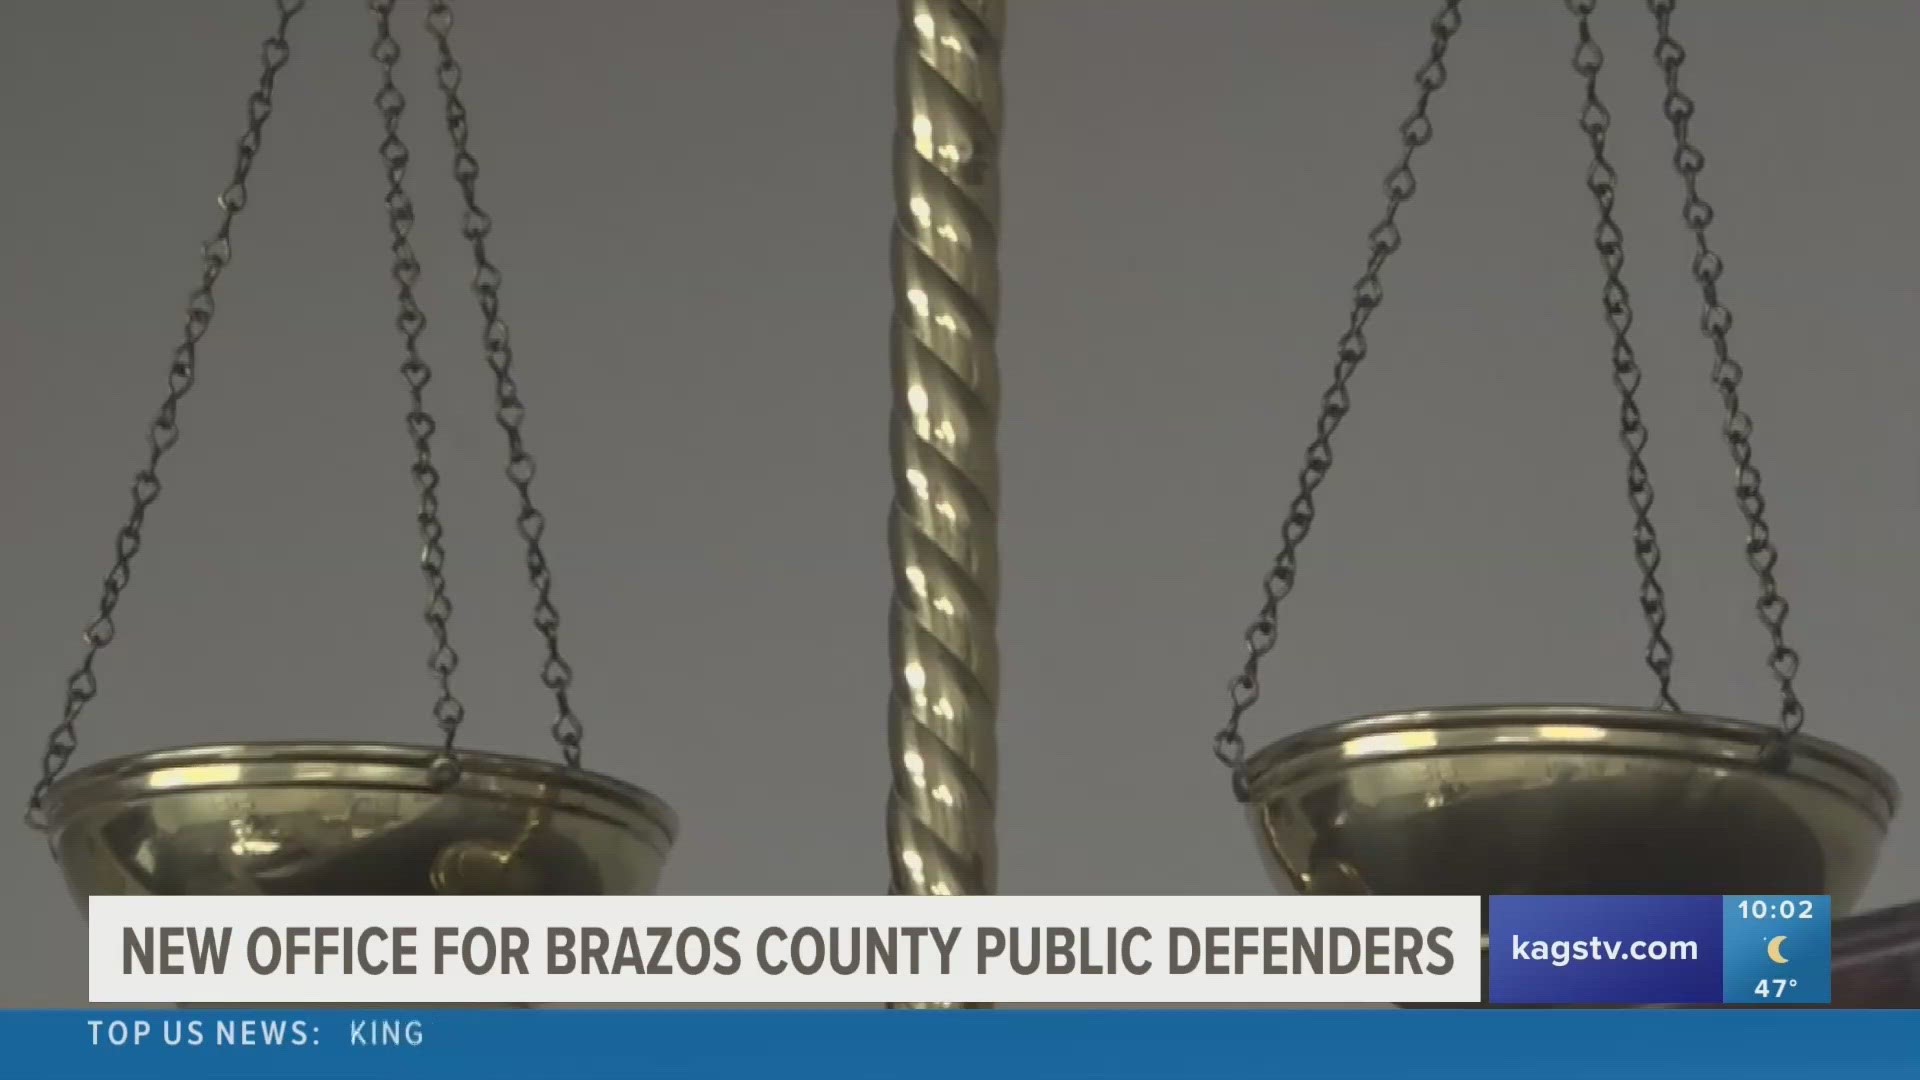 According to Chief Public Defender Nathan Wood, there were 3,000 active felony cases in Brazos County before the pandemic, and increased by 10% afterwards.